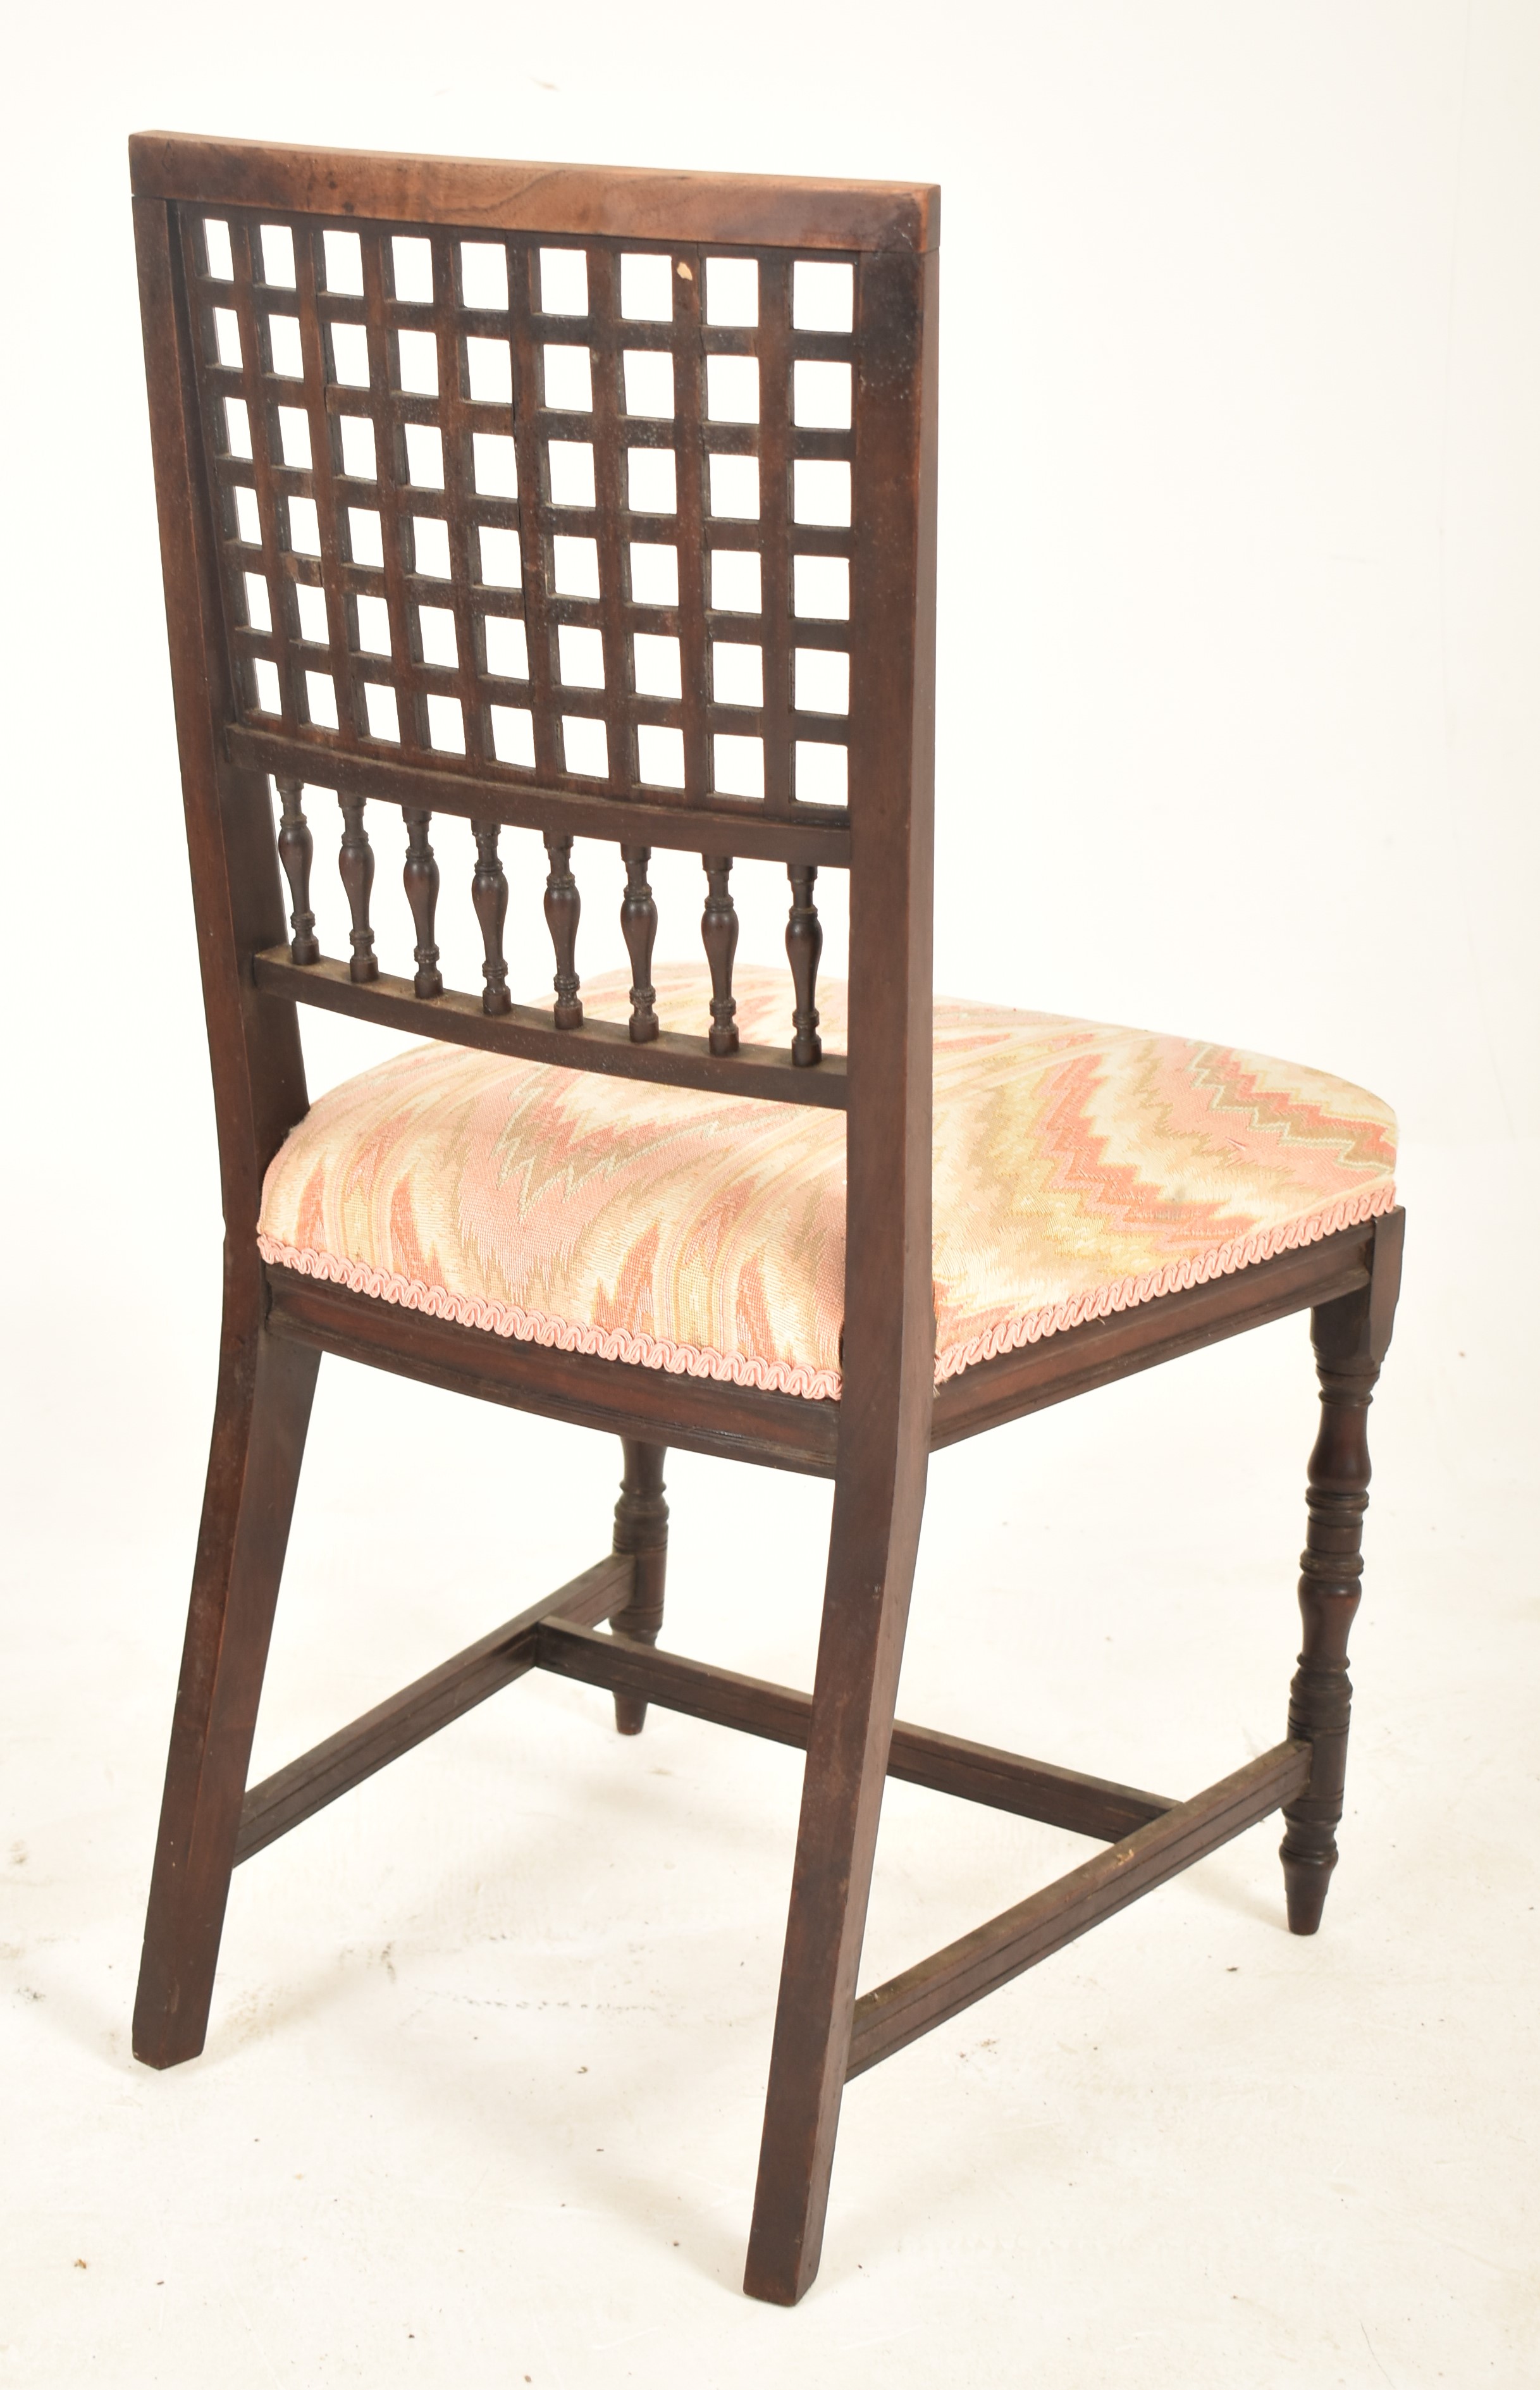 ARTS & CRAFTS 19TH CENTURY ROSEWOOD LATTICE BACK CHAIR - Image 5 of 5